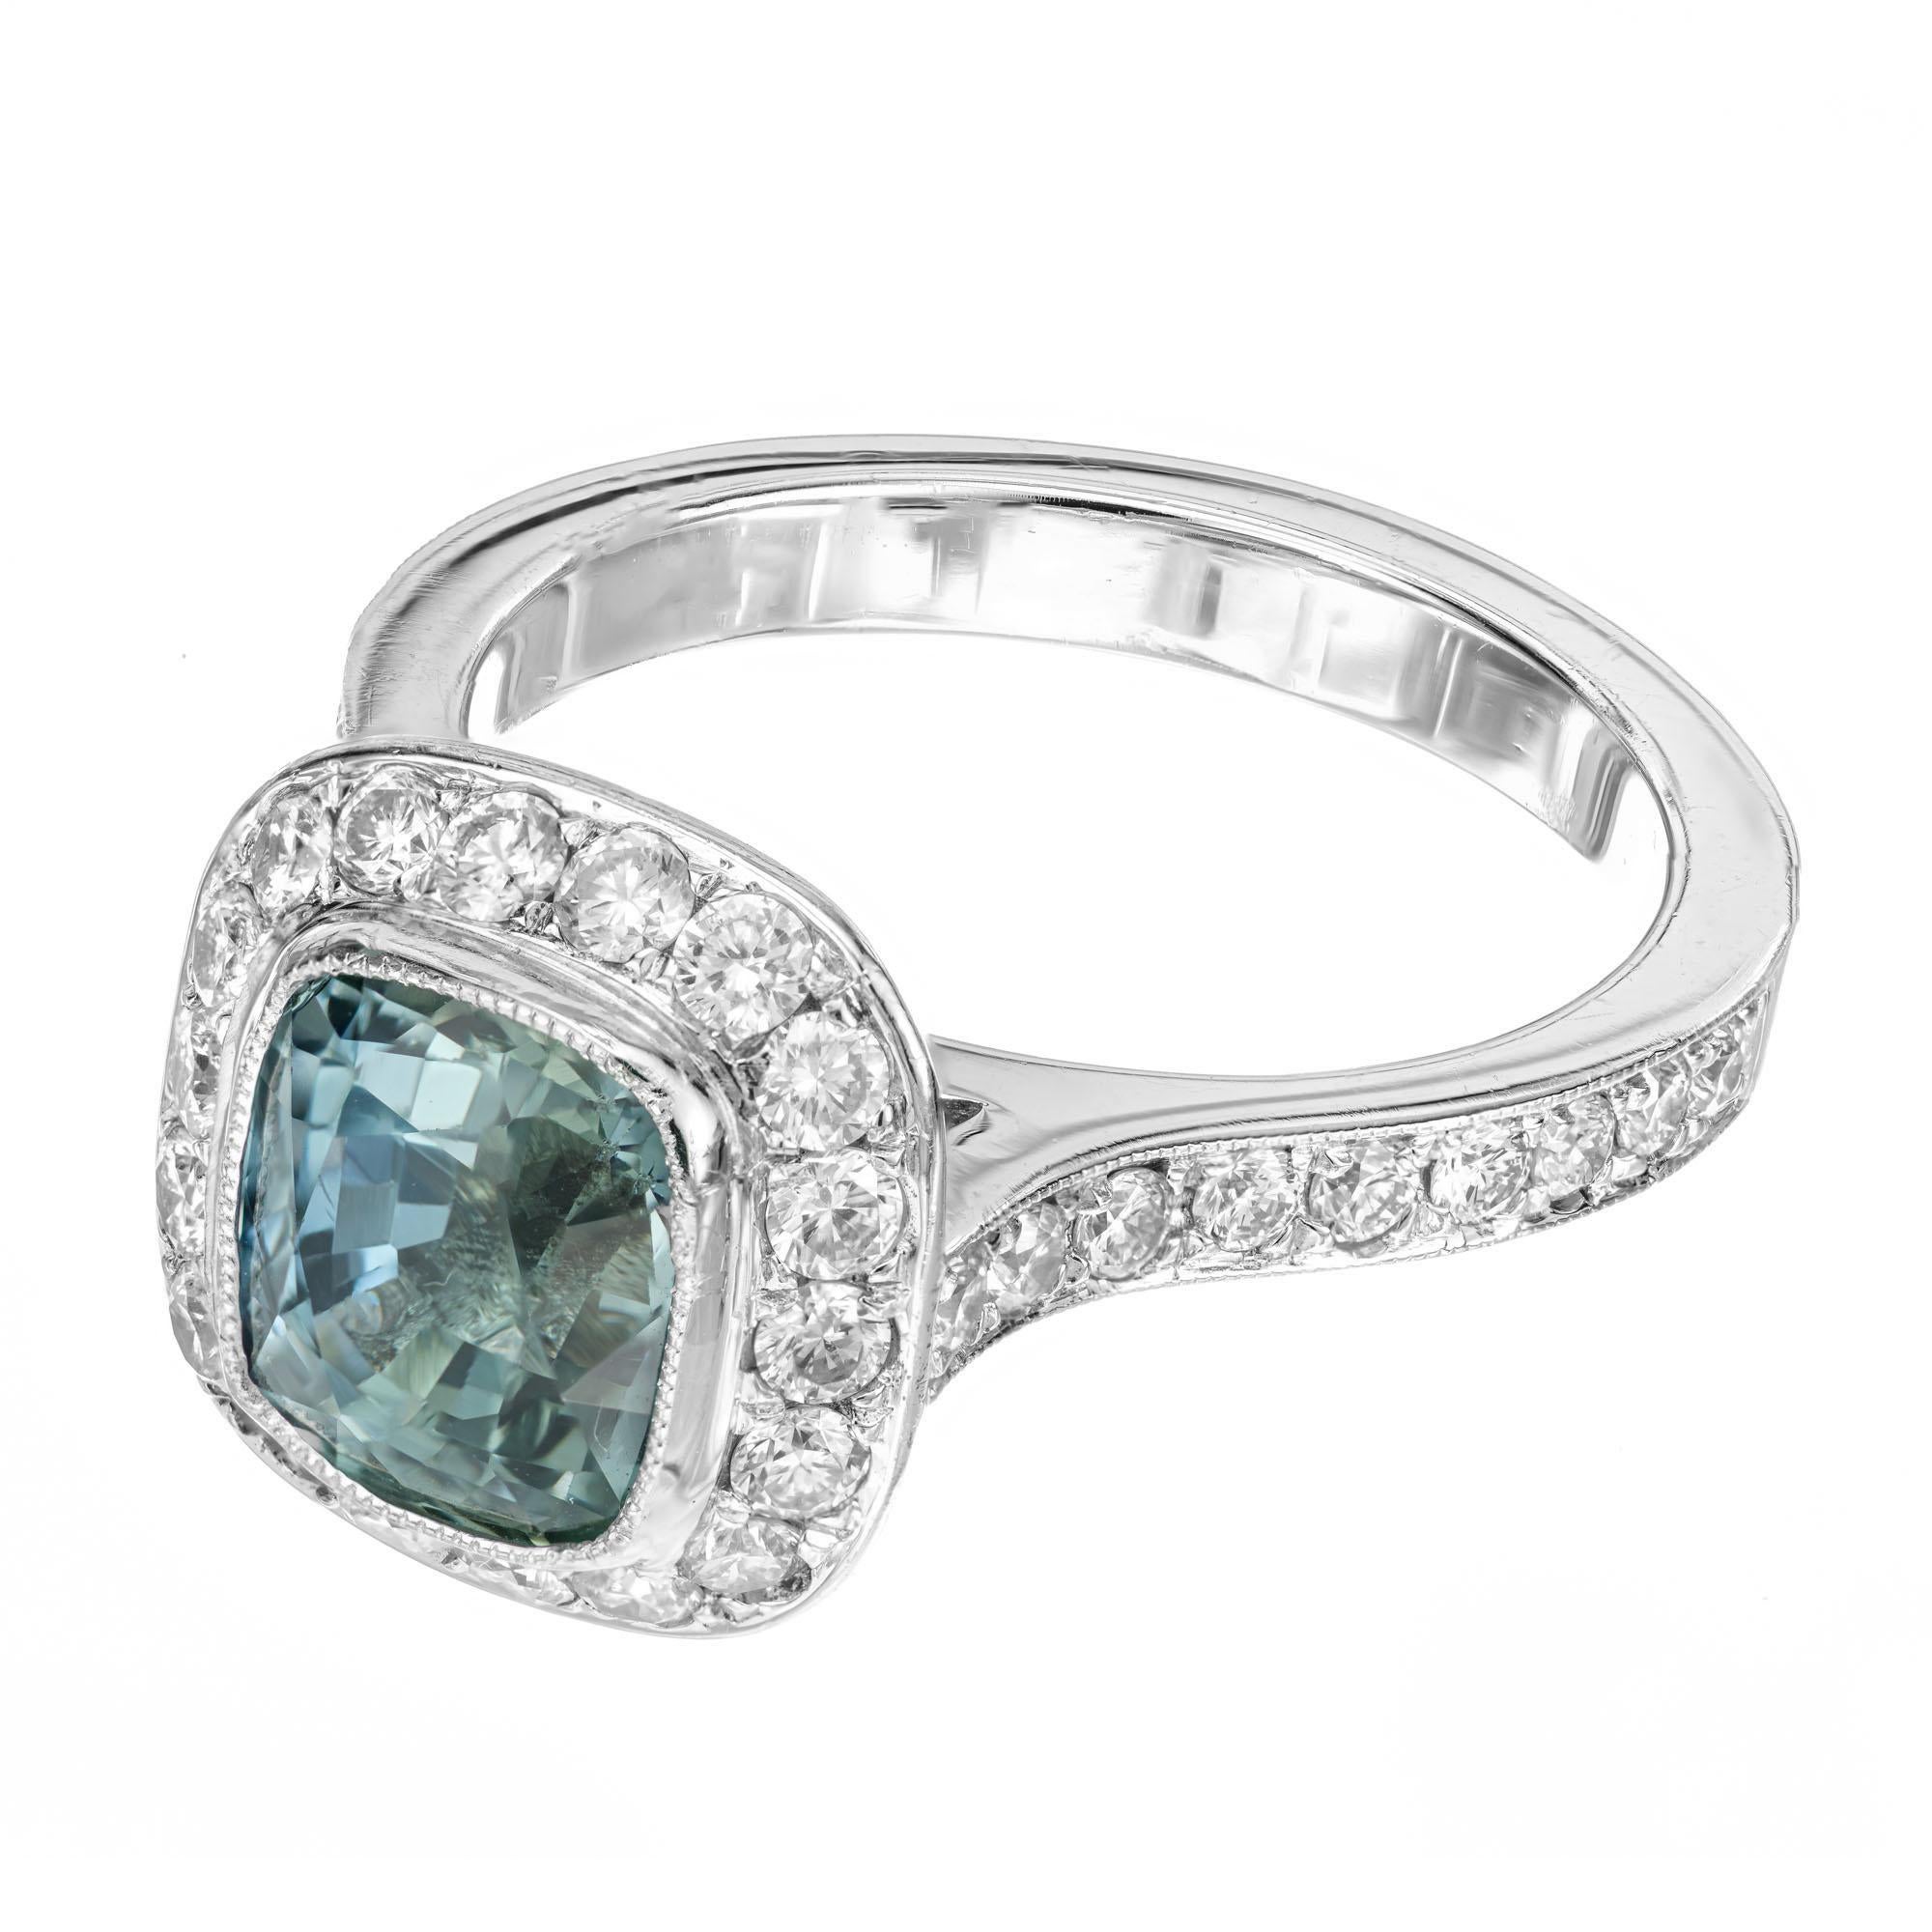 Blue and green sapphire and diamond engagement ring. GIA certified 3.20 carat natural no heat center cushion cut sapphire with 48 round ideal cut diamonds in a platinum halo setting. Both shoulders of the shank are also adorned with round cut